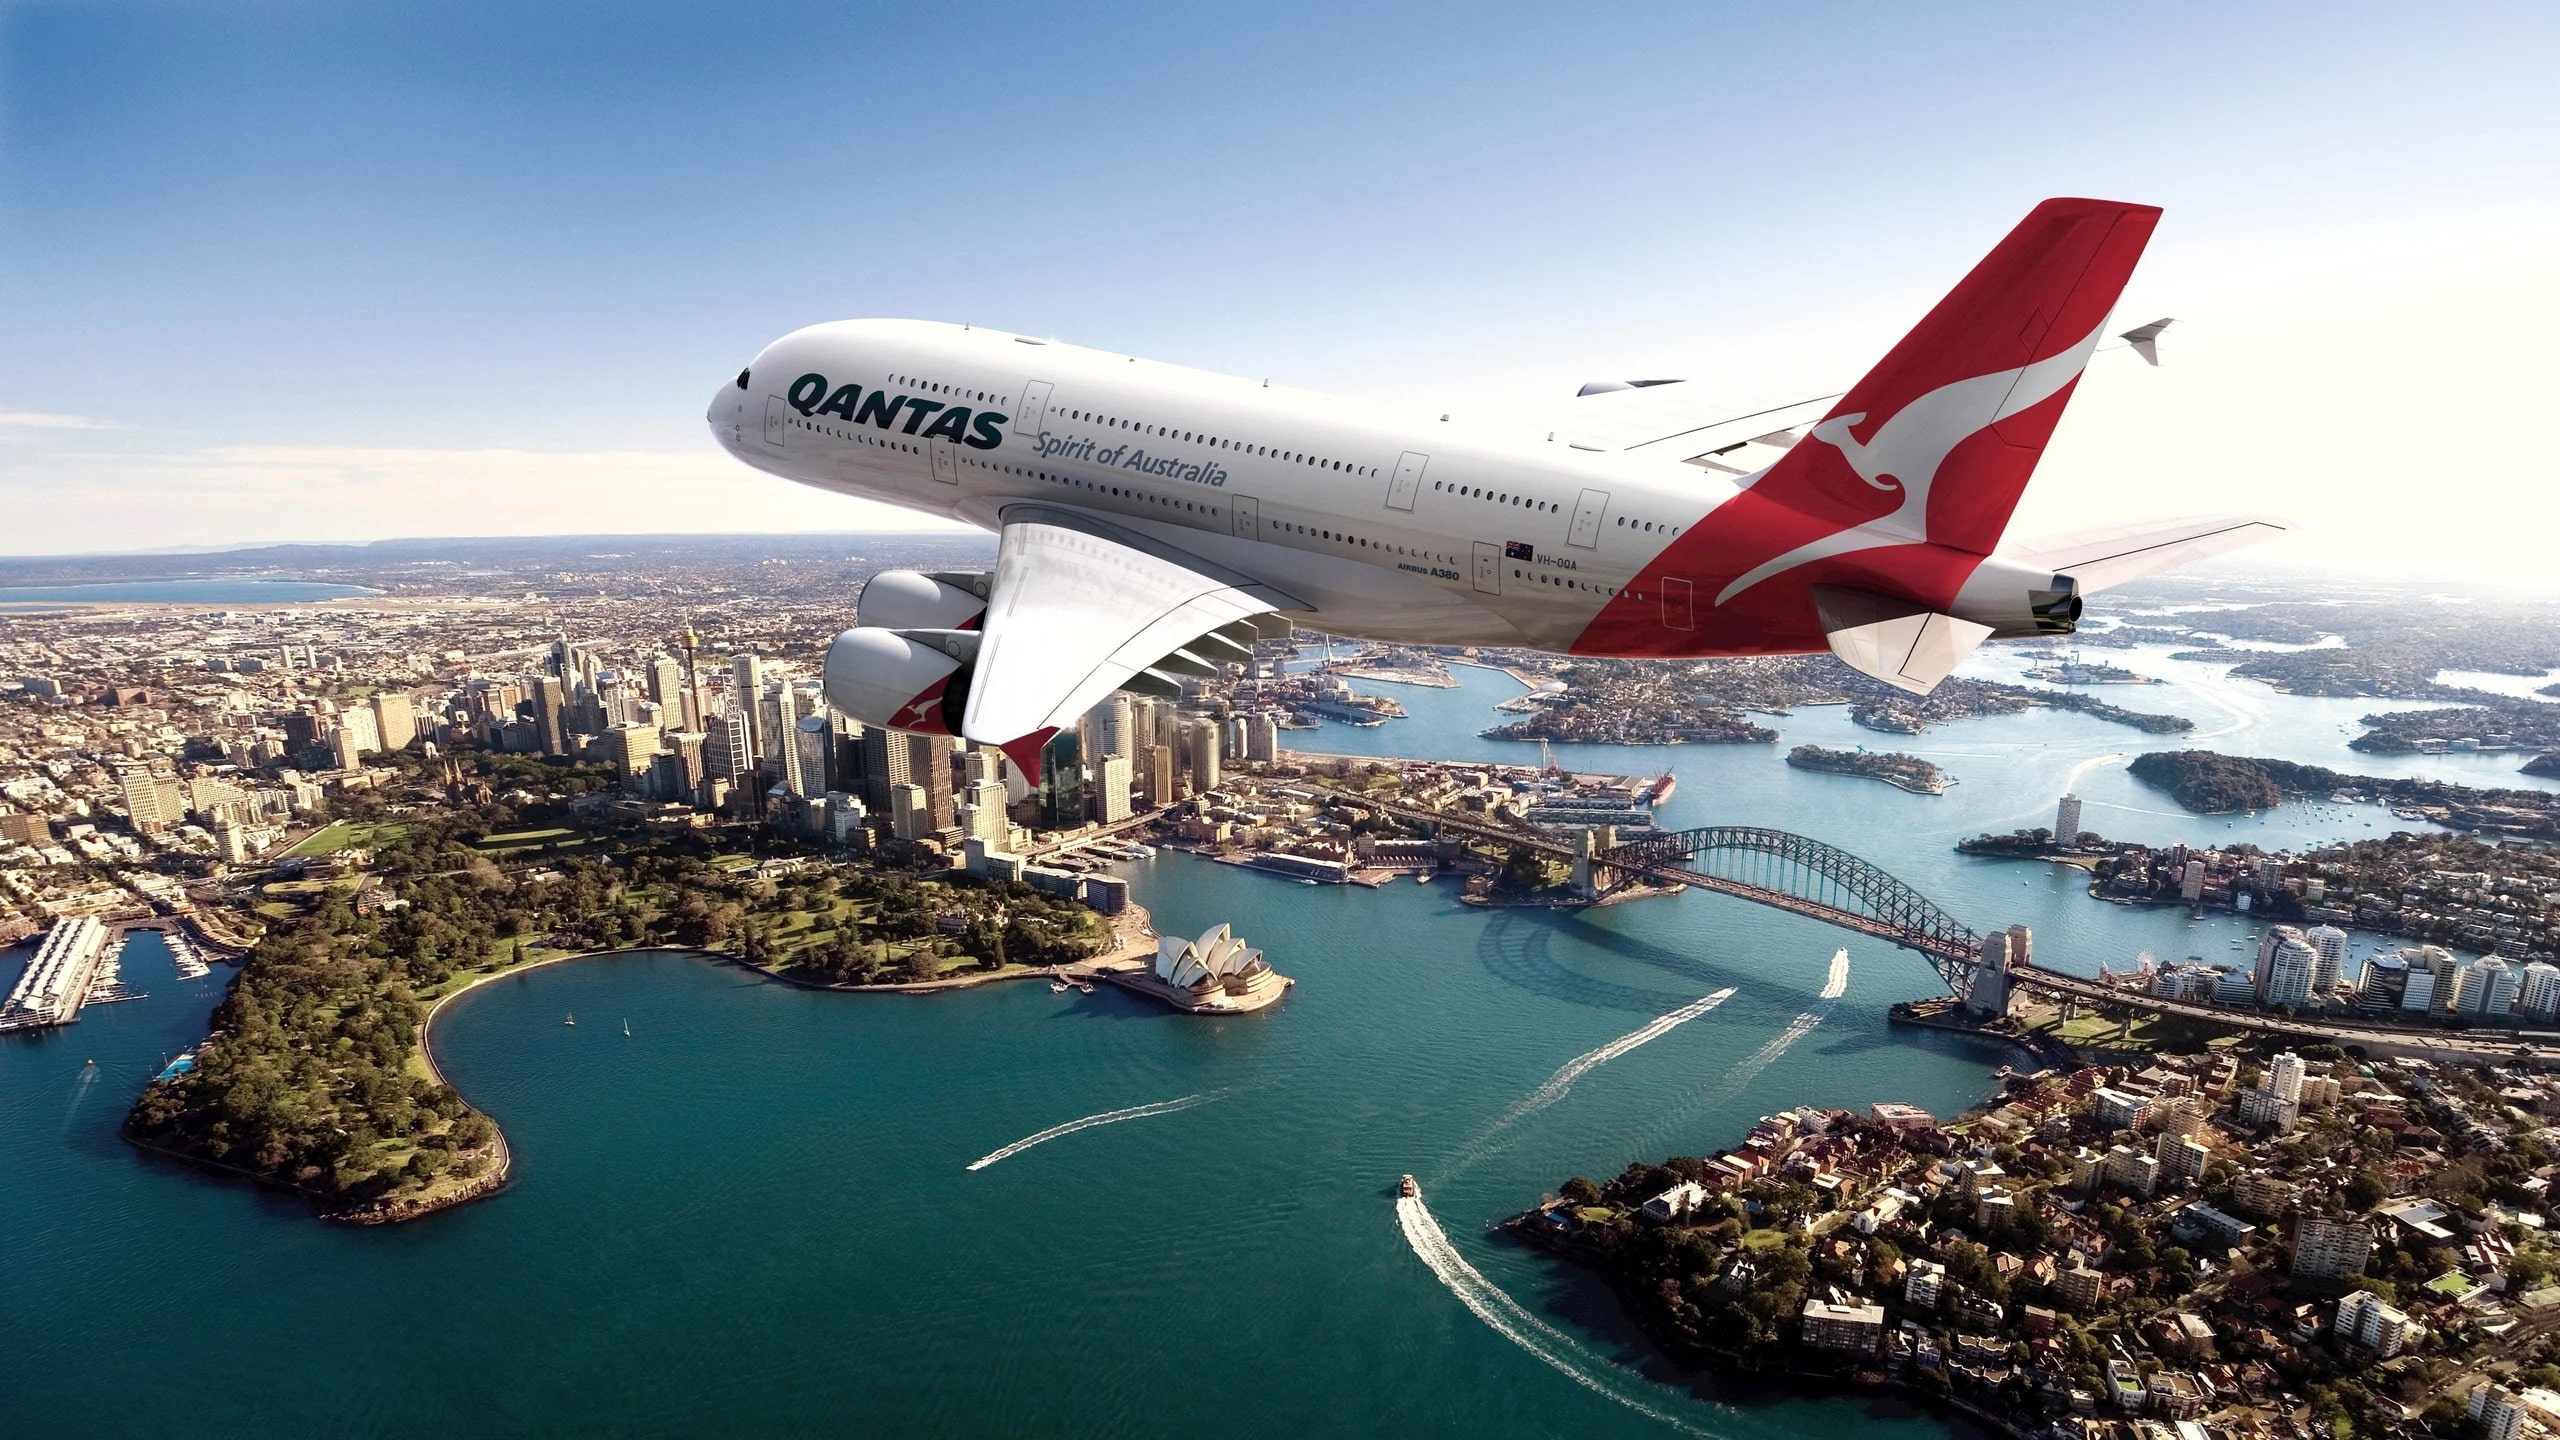 Qantas Sightseeing Flight Sold Out Within Minutes